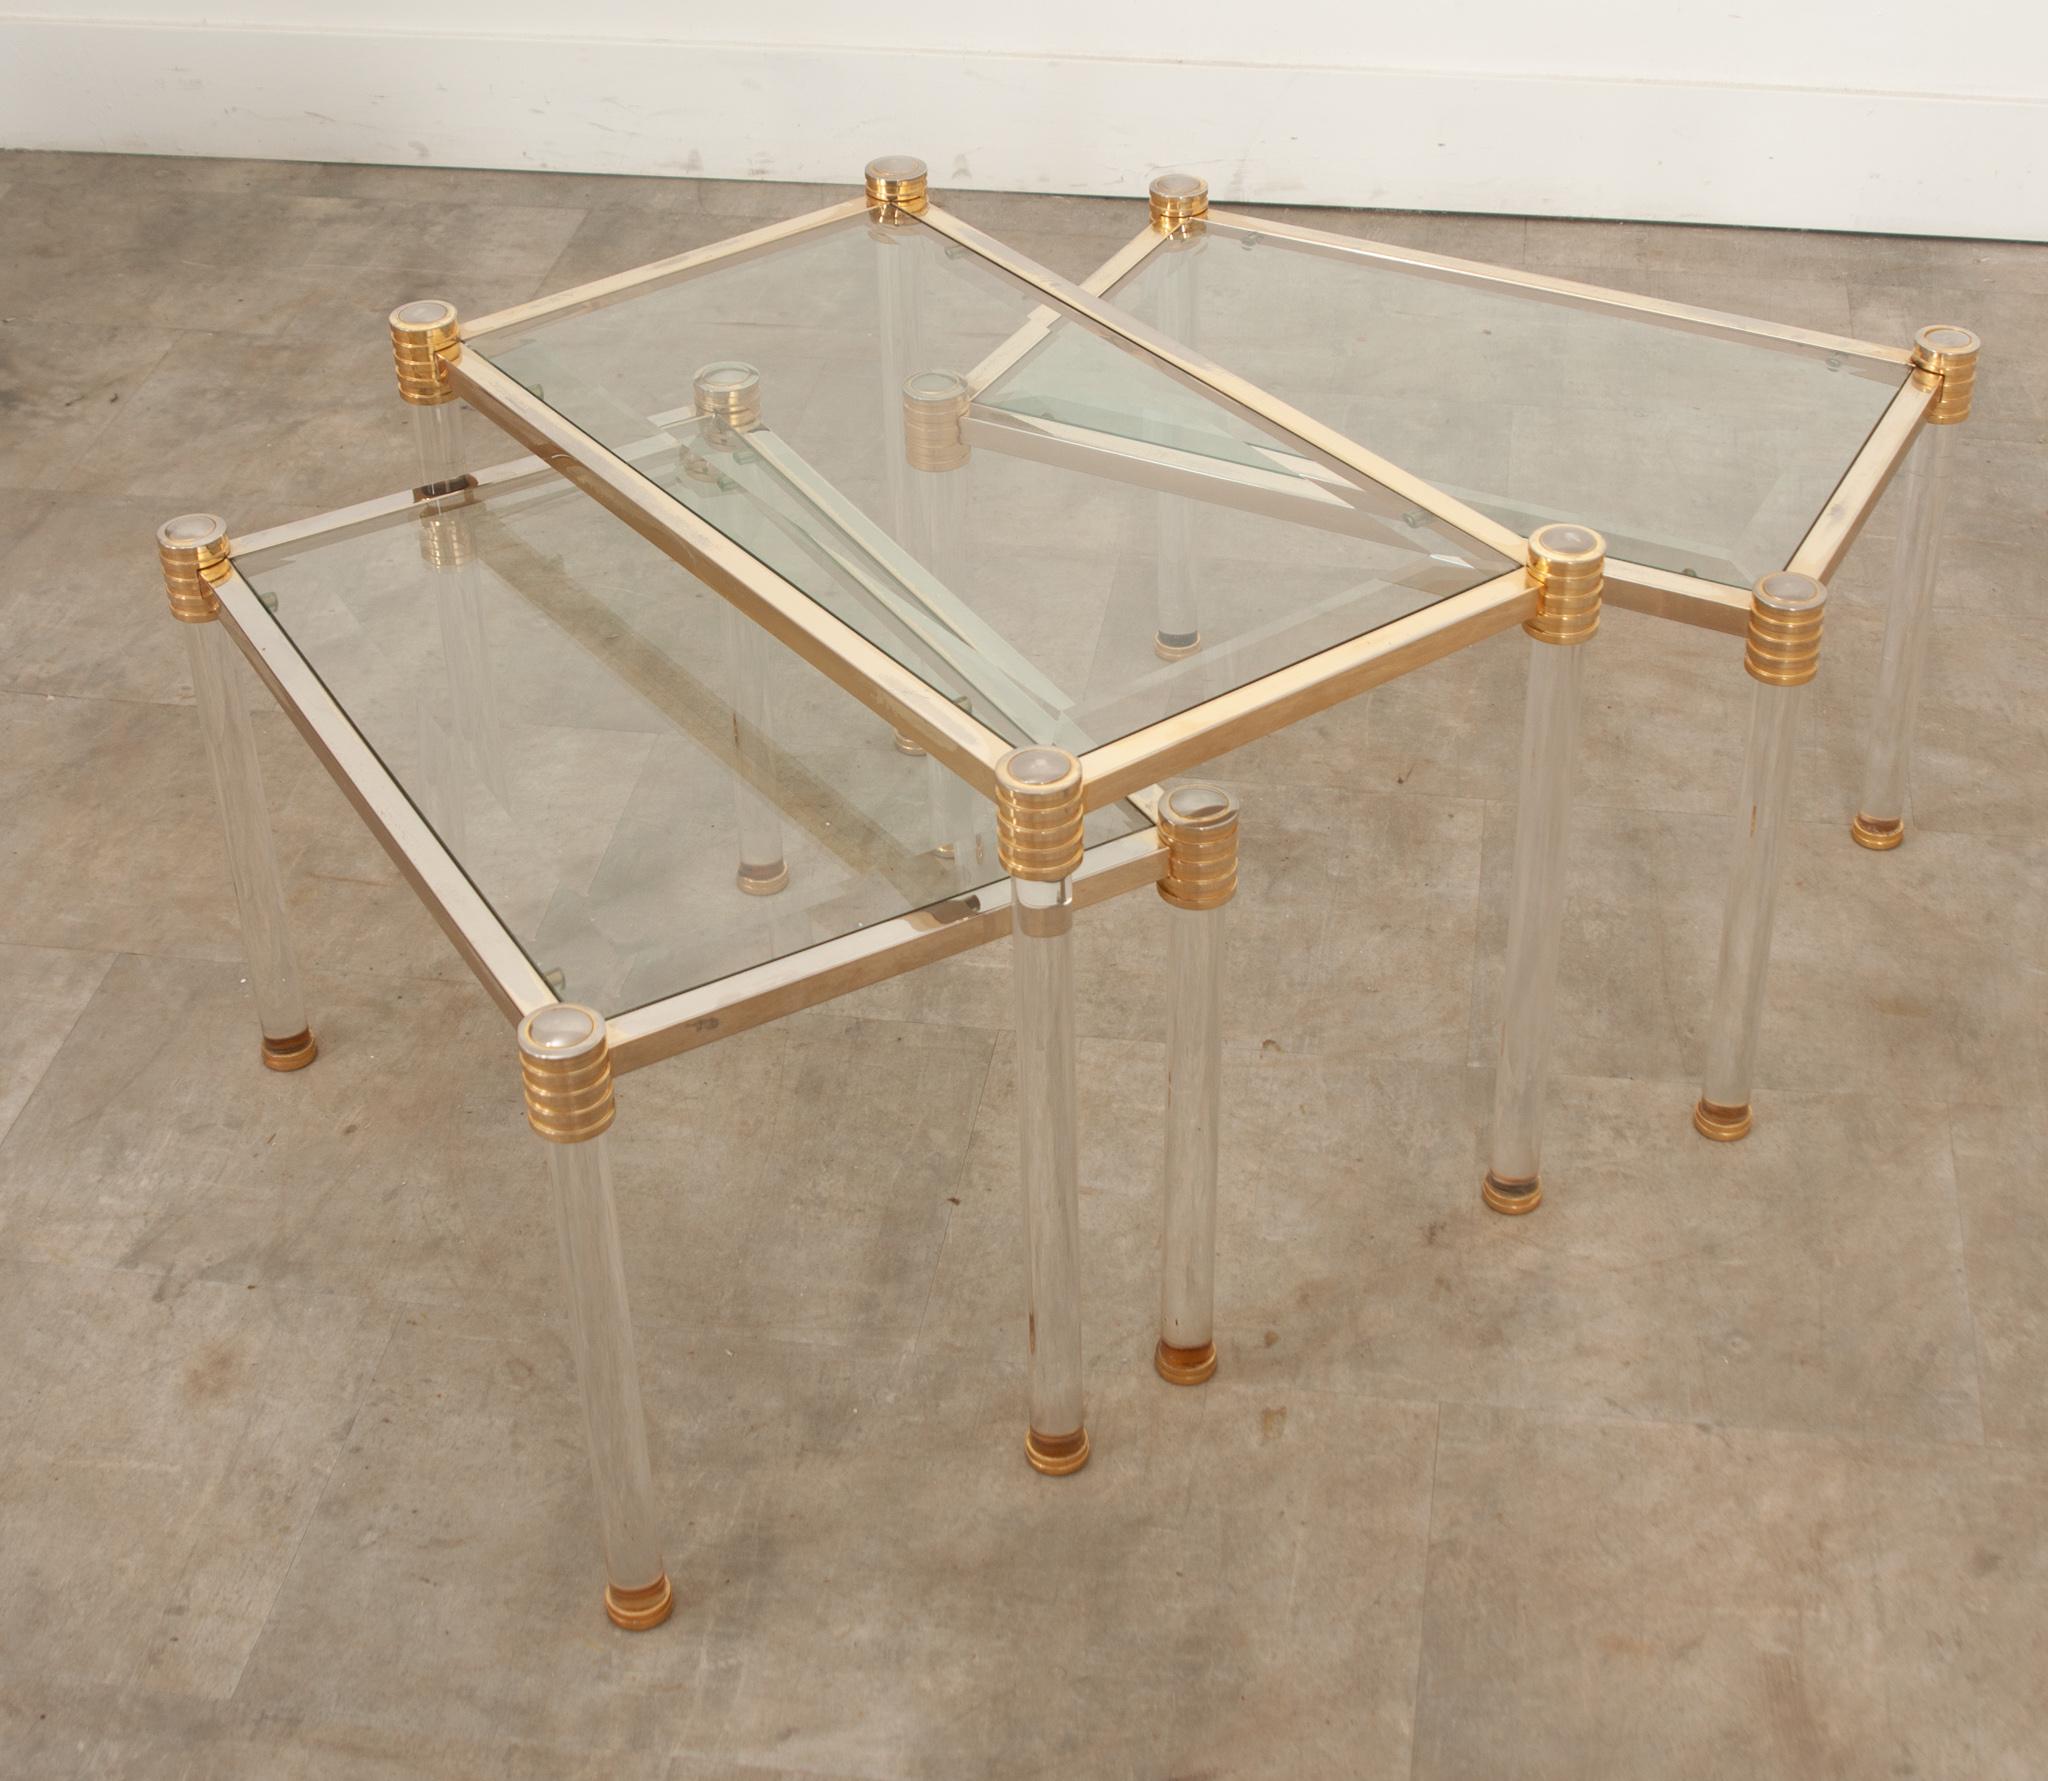 A fabulous vintage set of three French brass and glass side tables with unique flair. Their frames are made of patinated brass supported by lucite cylindrical legs with decorative brass caps. Snuggly enclosed in brass, the beveled glass tops are in